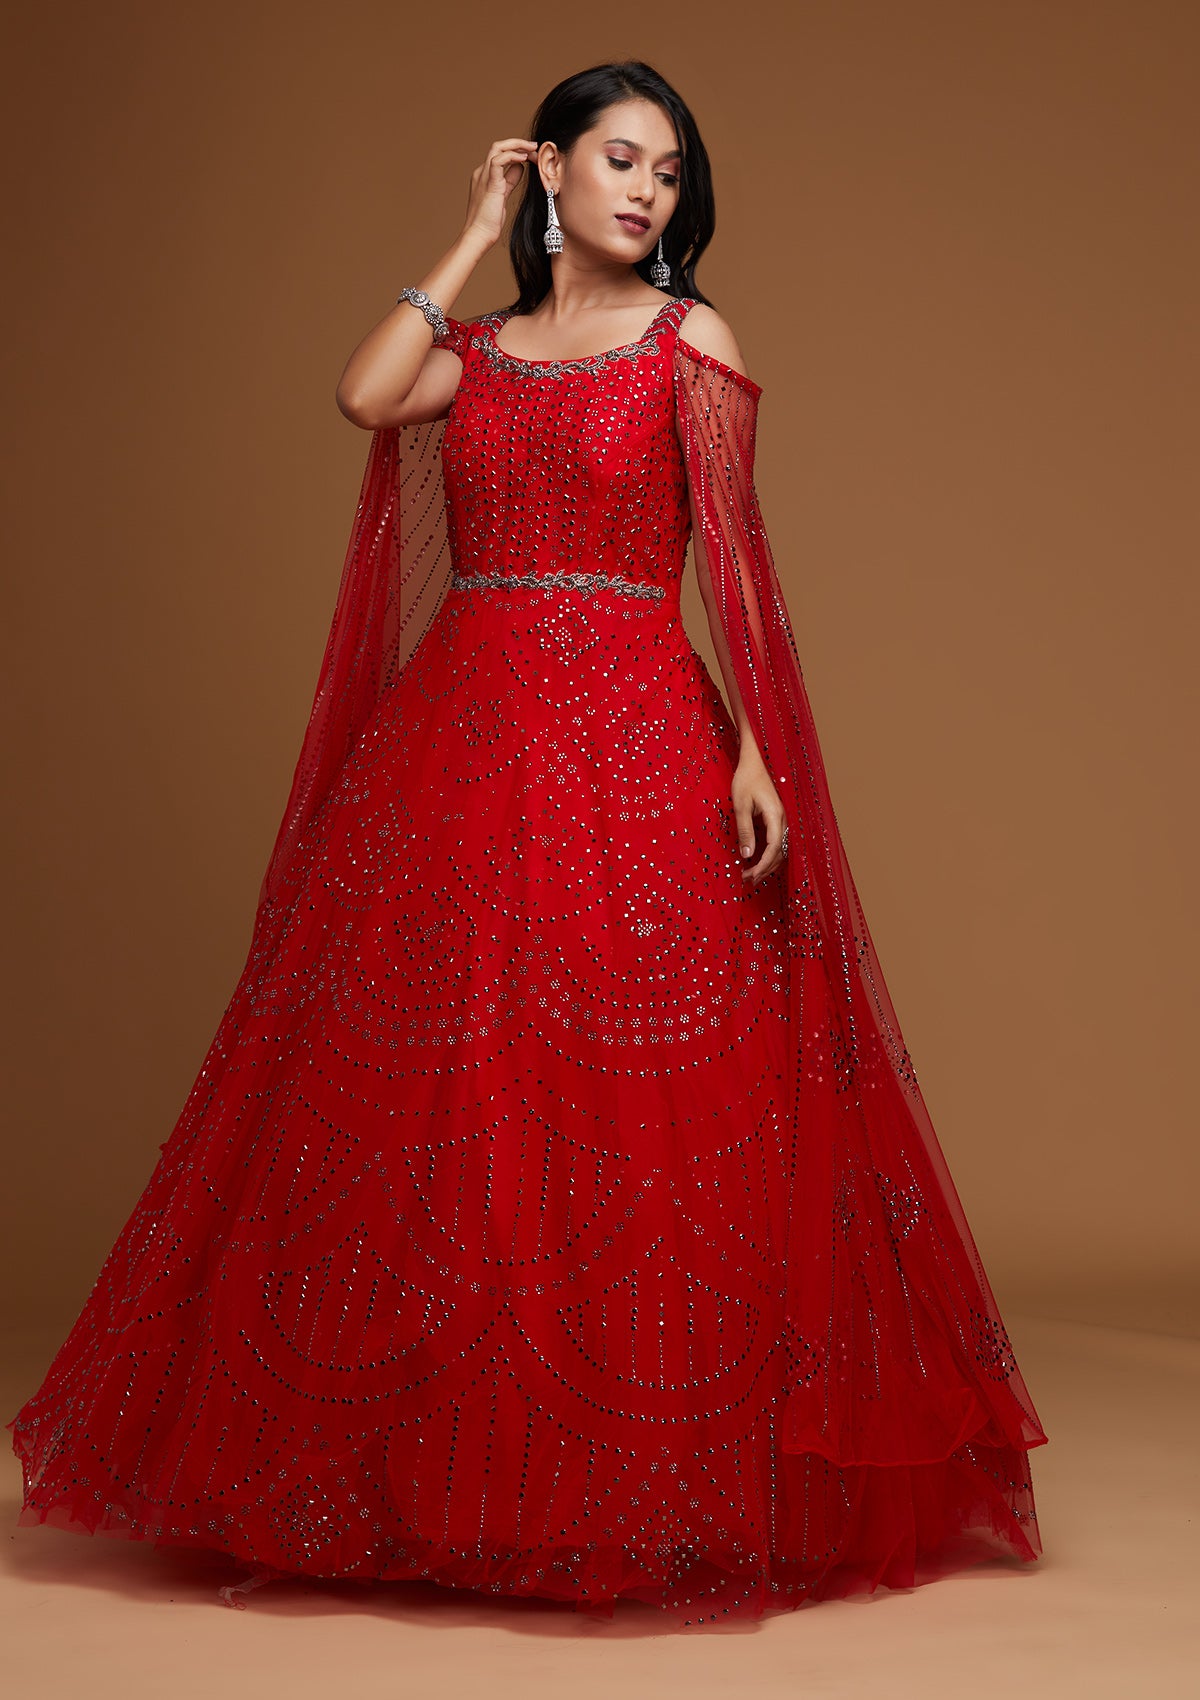 Buy Princess Red Cap Sleeves Tiered Skirt Ball Gown Weddingprom Online in  India  Etsy